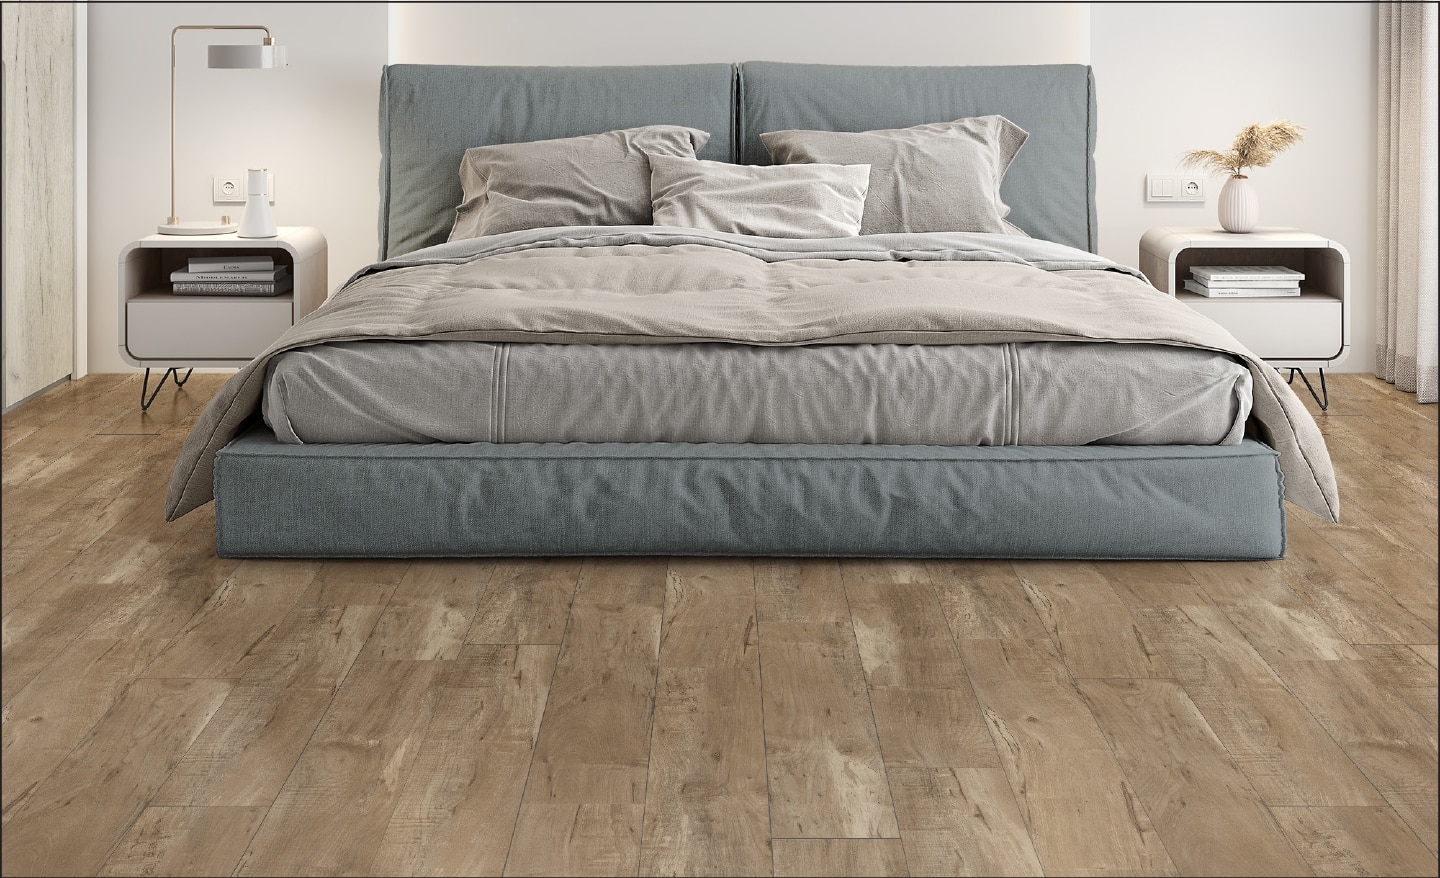 Laminate flooring that looks like wood is installed under a king-sized bed.